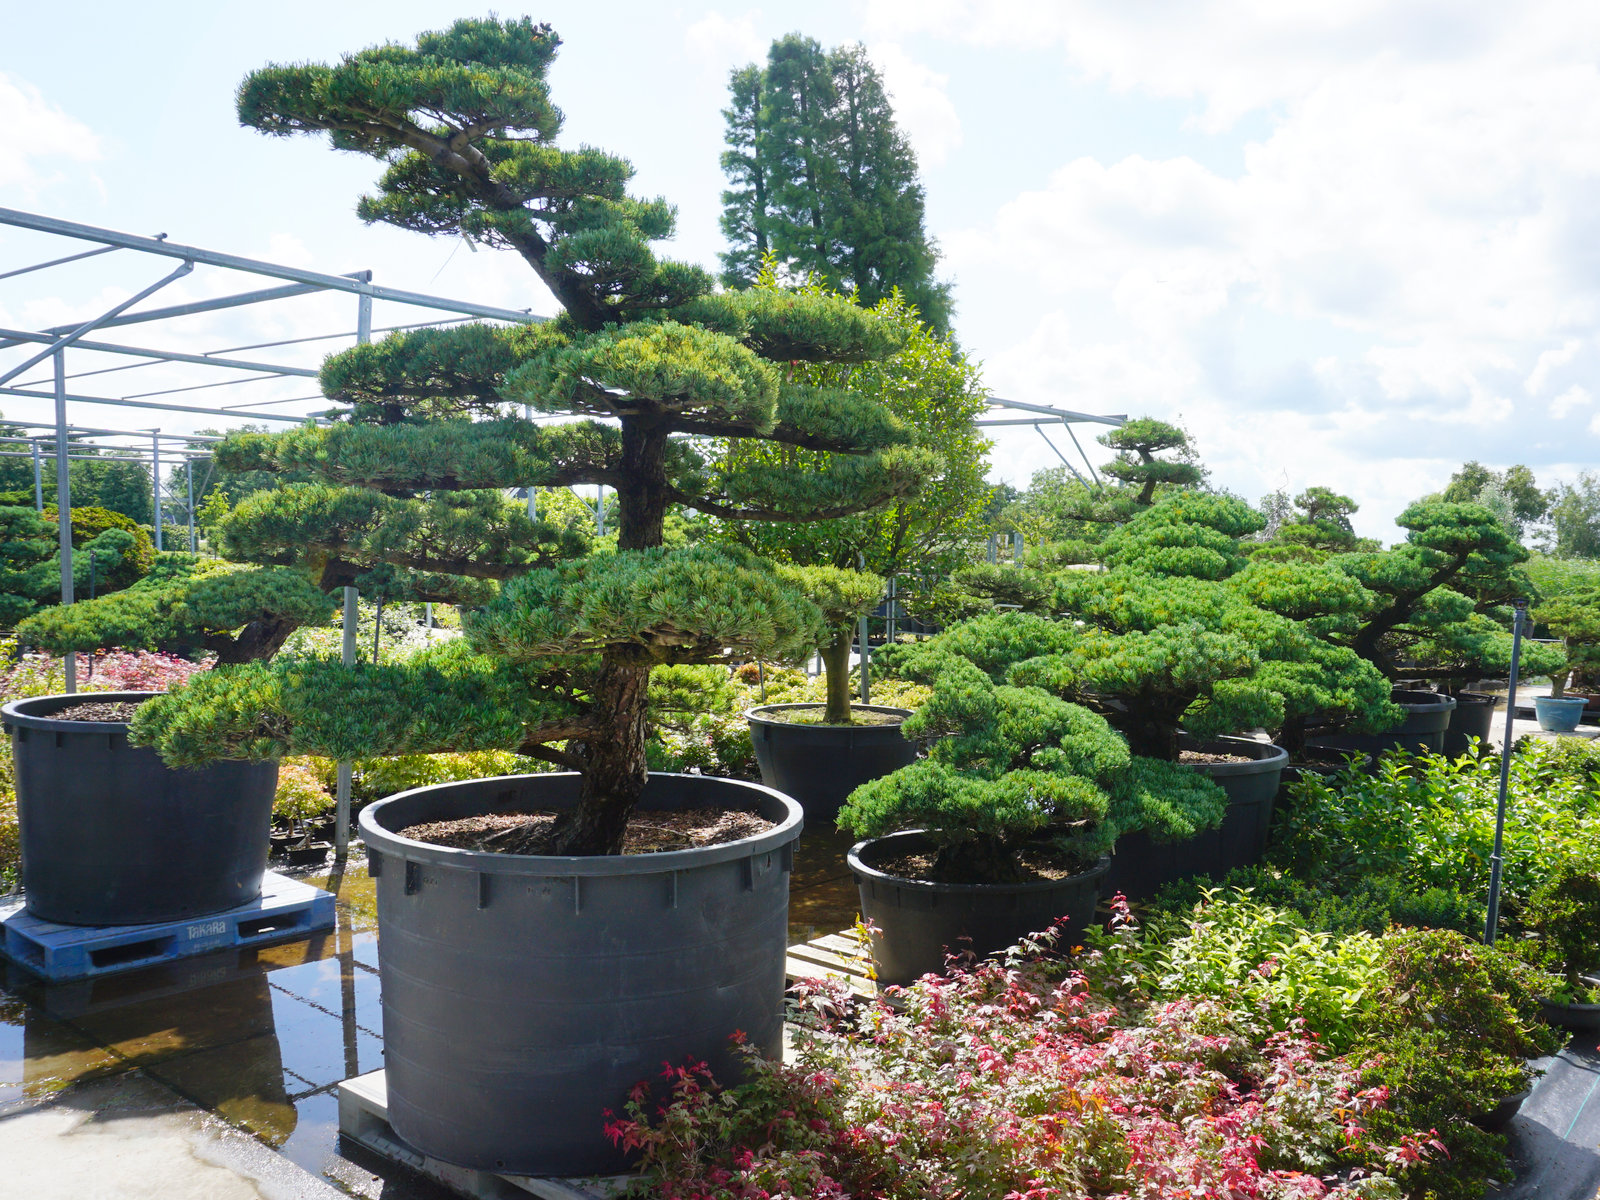 Japanese Niwaki Trees and Plants for Sale, White Pine and Maple